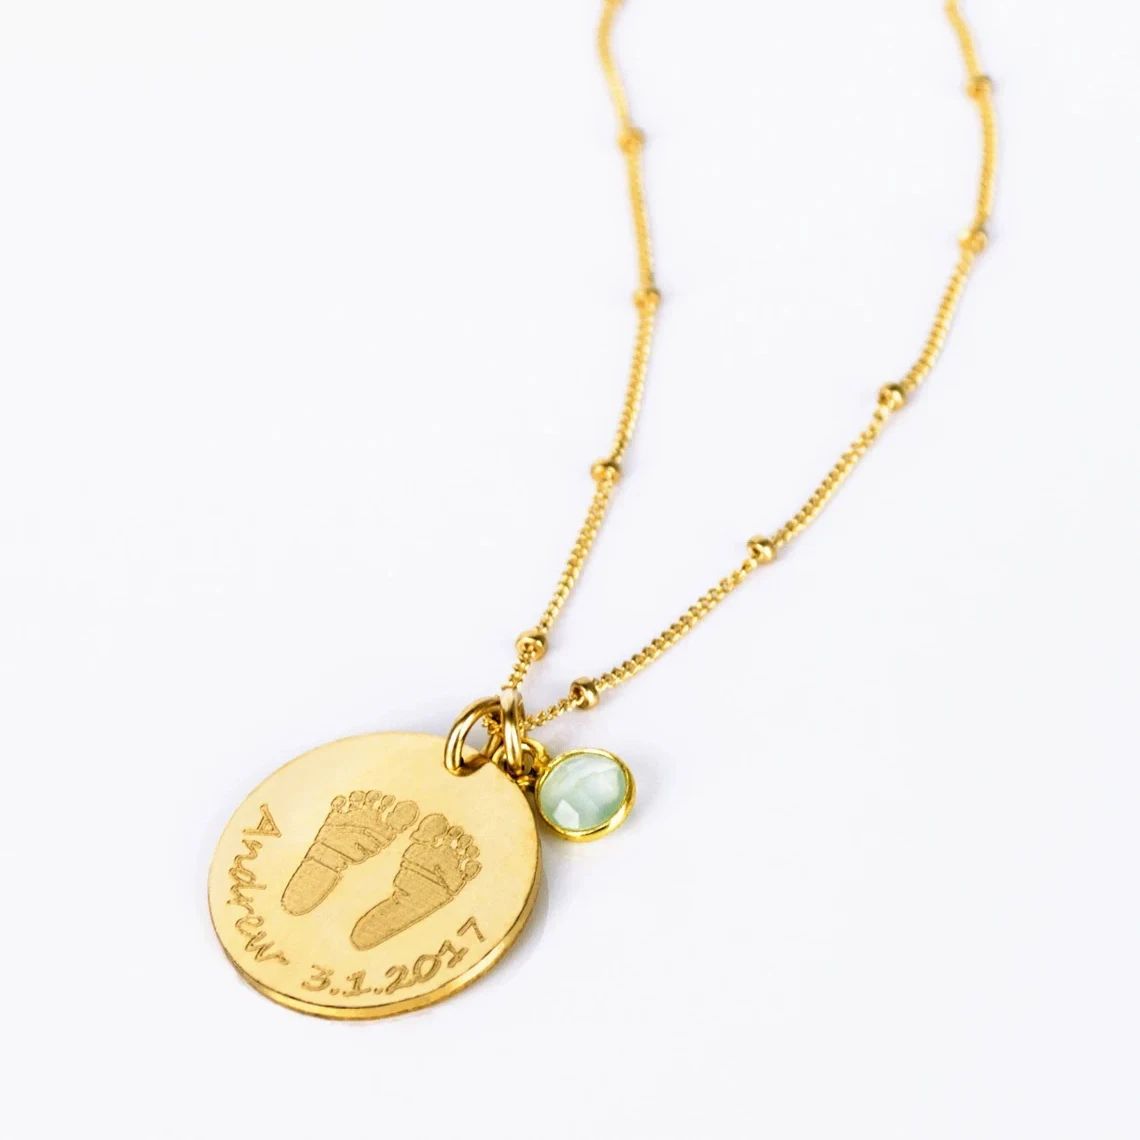 Custom Baby Footprint Necklace Engraved Date With Birthstone Locket Coin Handprint Kids Name Necklaces Jewelry For Mother Gifts